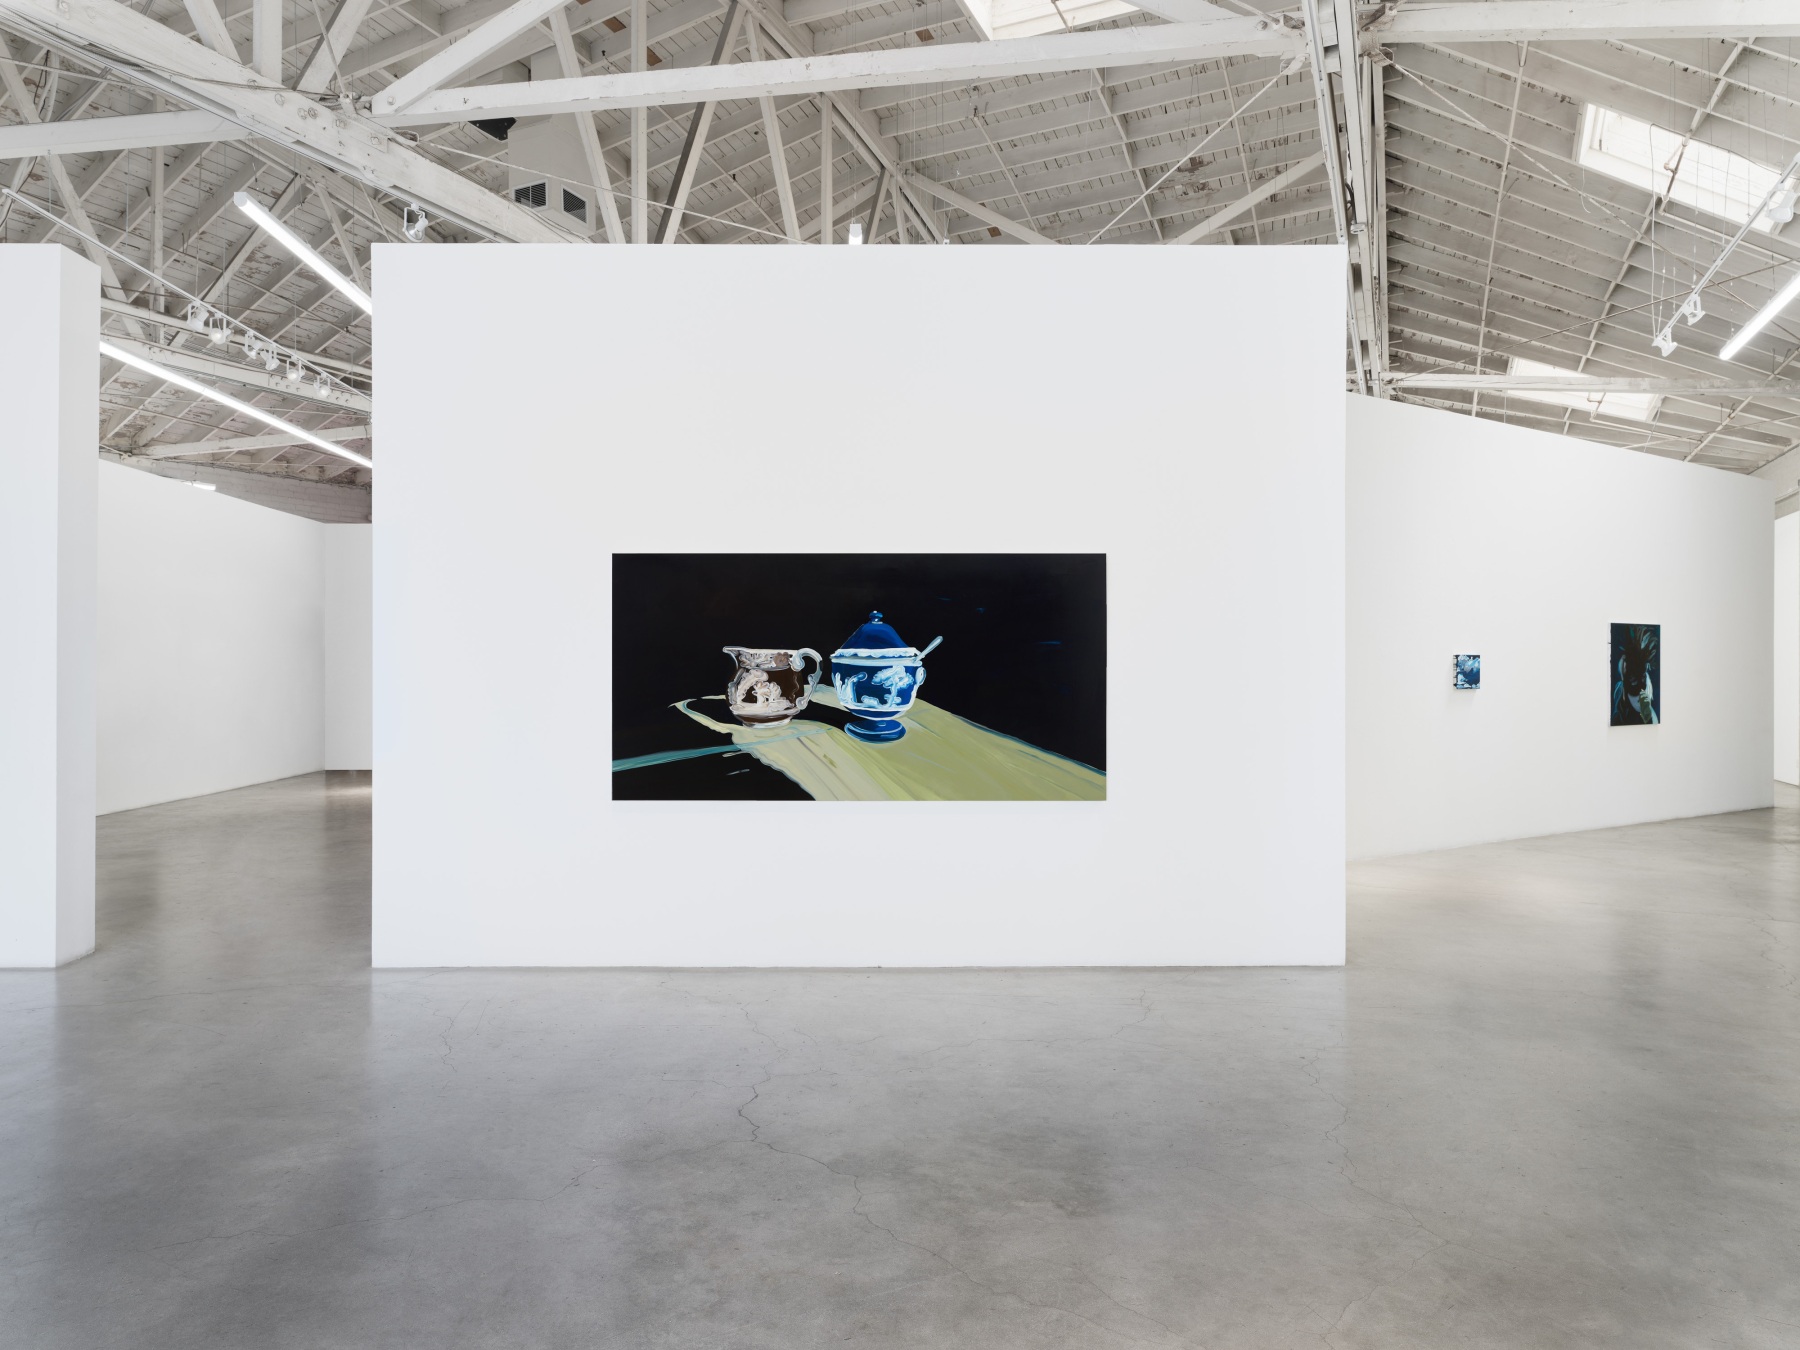 Clare Woods, After Limbo, installation view, 2022